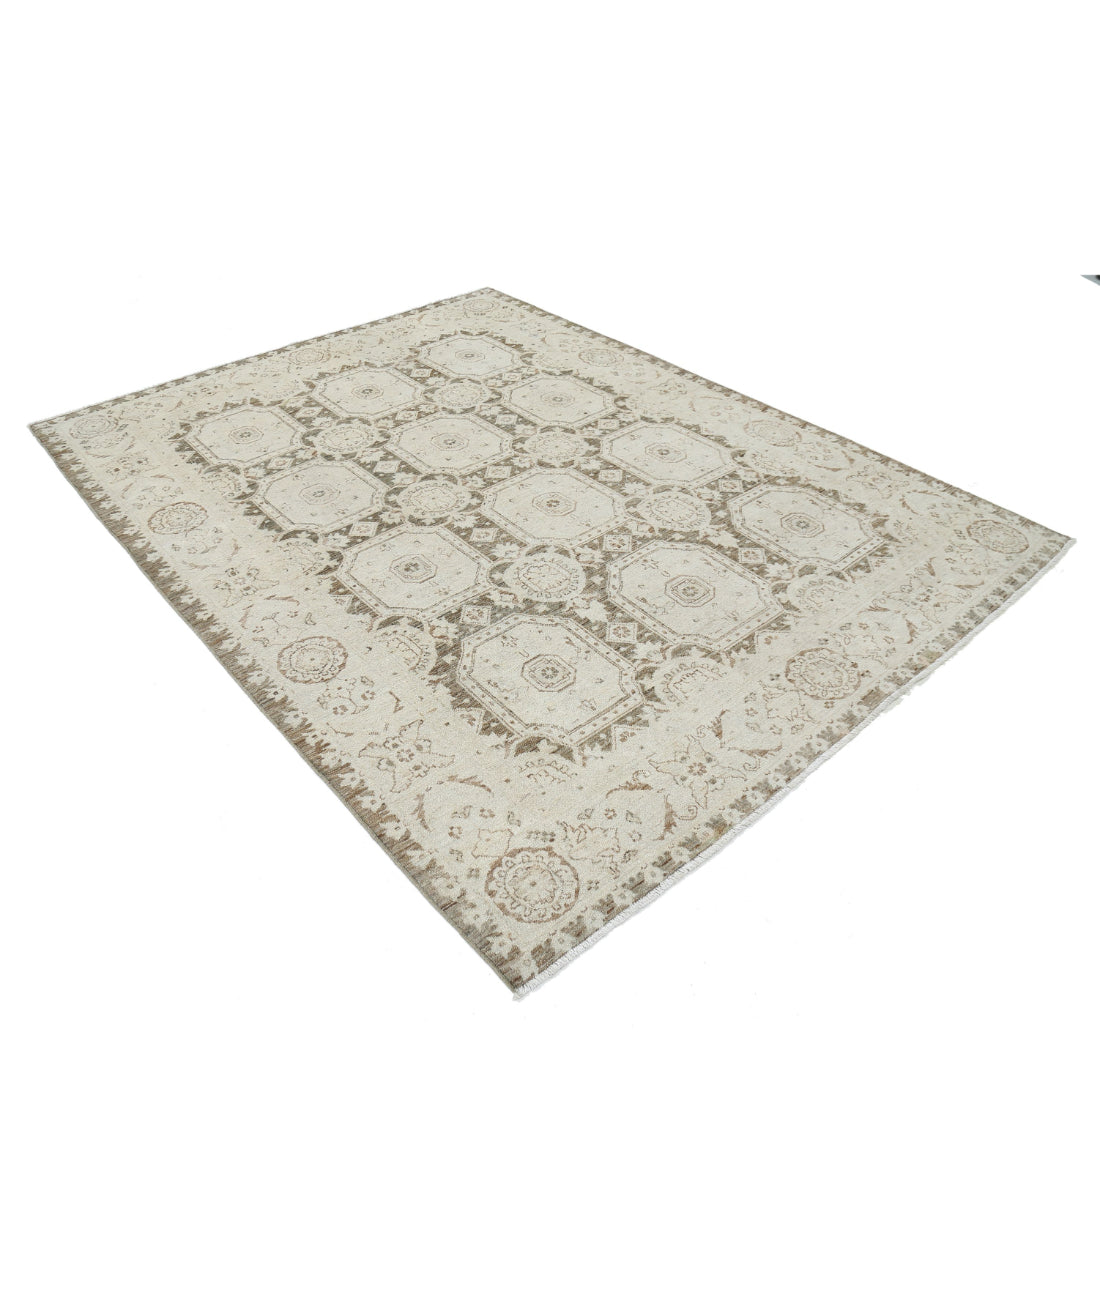 Hand Knotted Serenity Wool Rug - 6'6'' x 8'6'' 6'6'' x 8'6'' (195 X 255) / Brown / Ivory